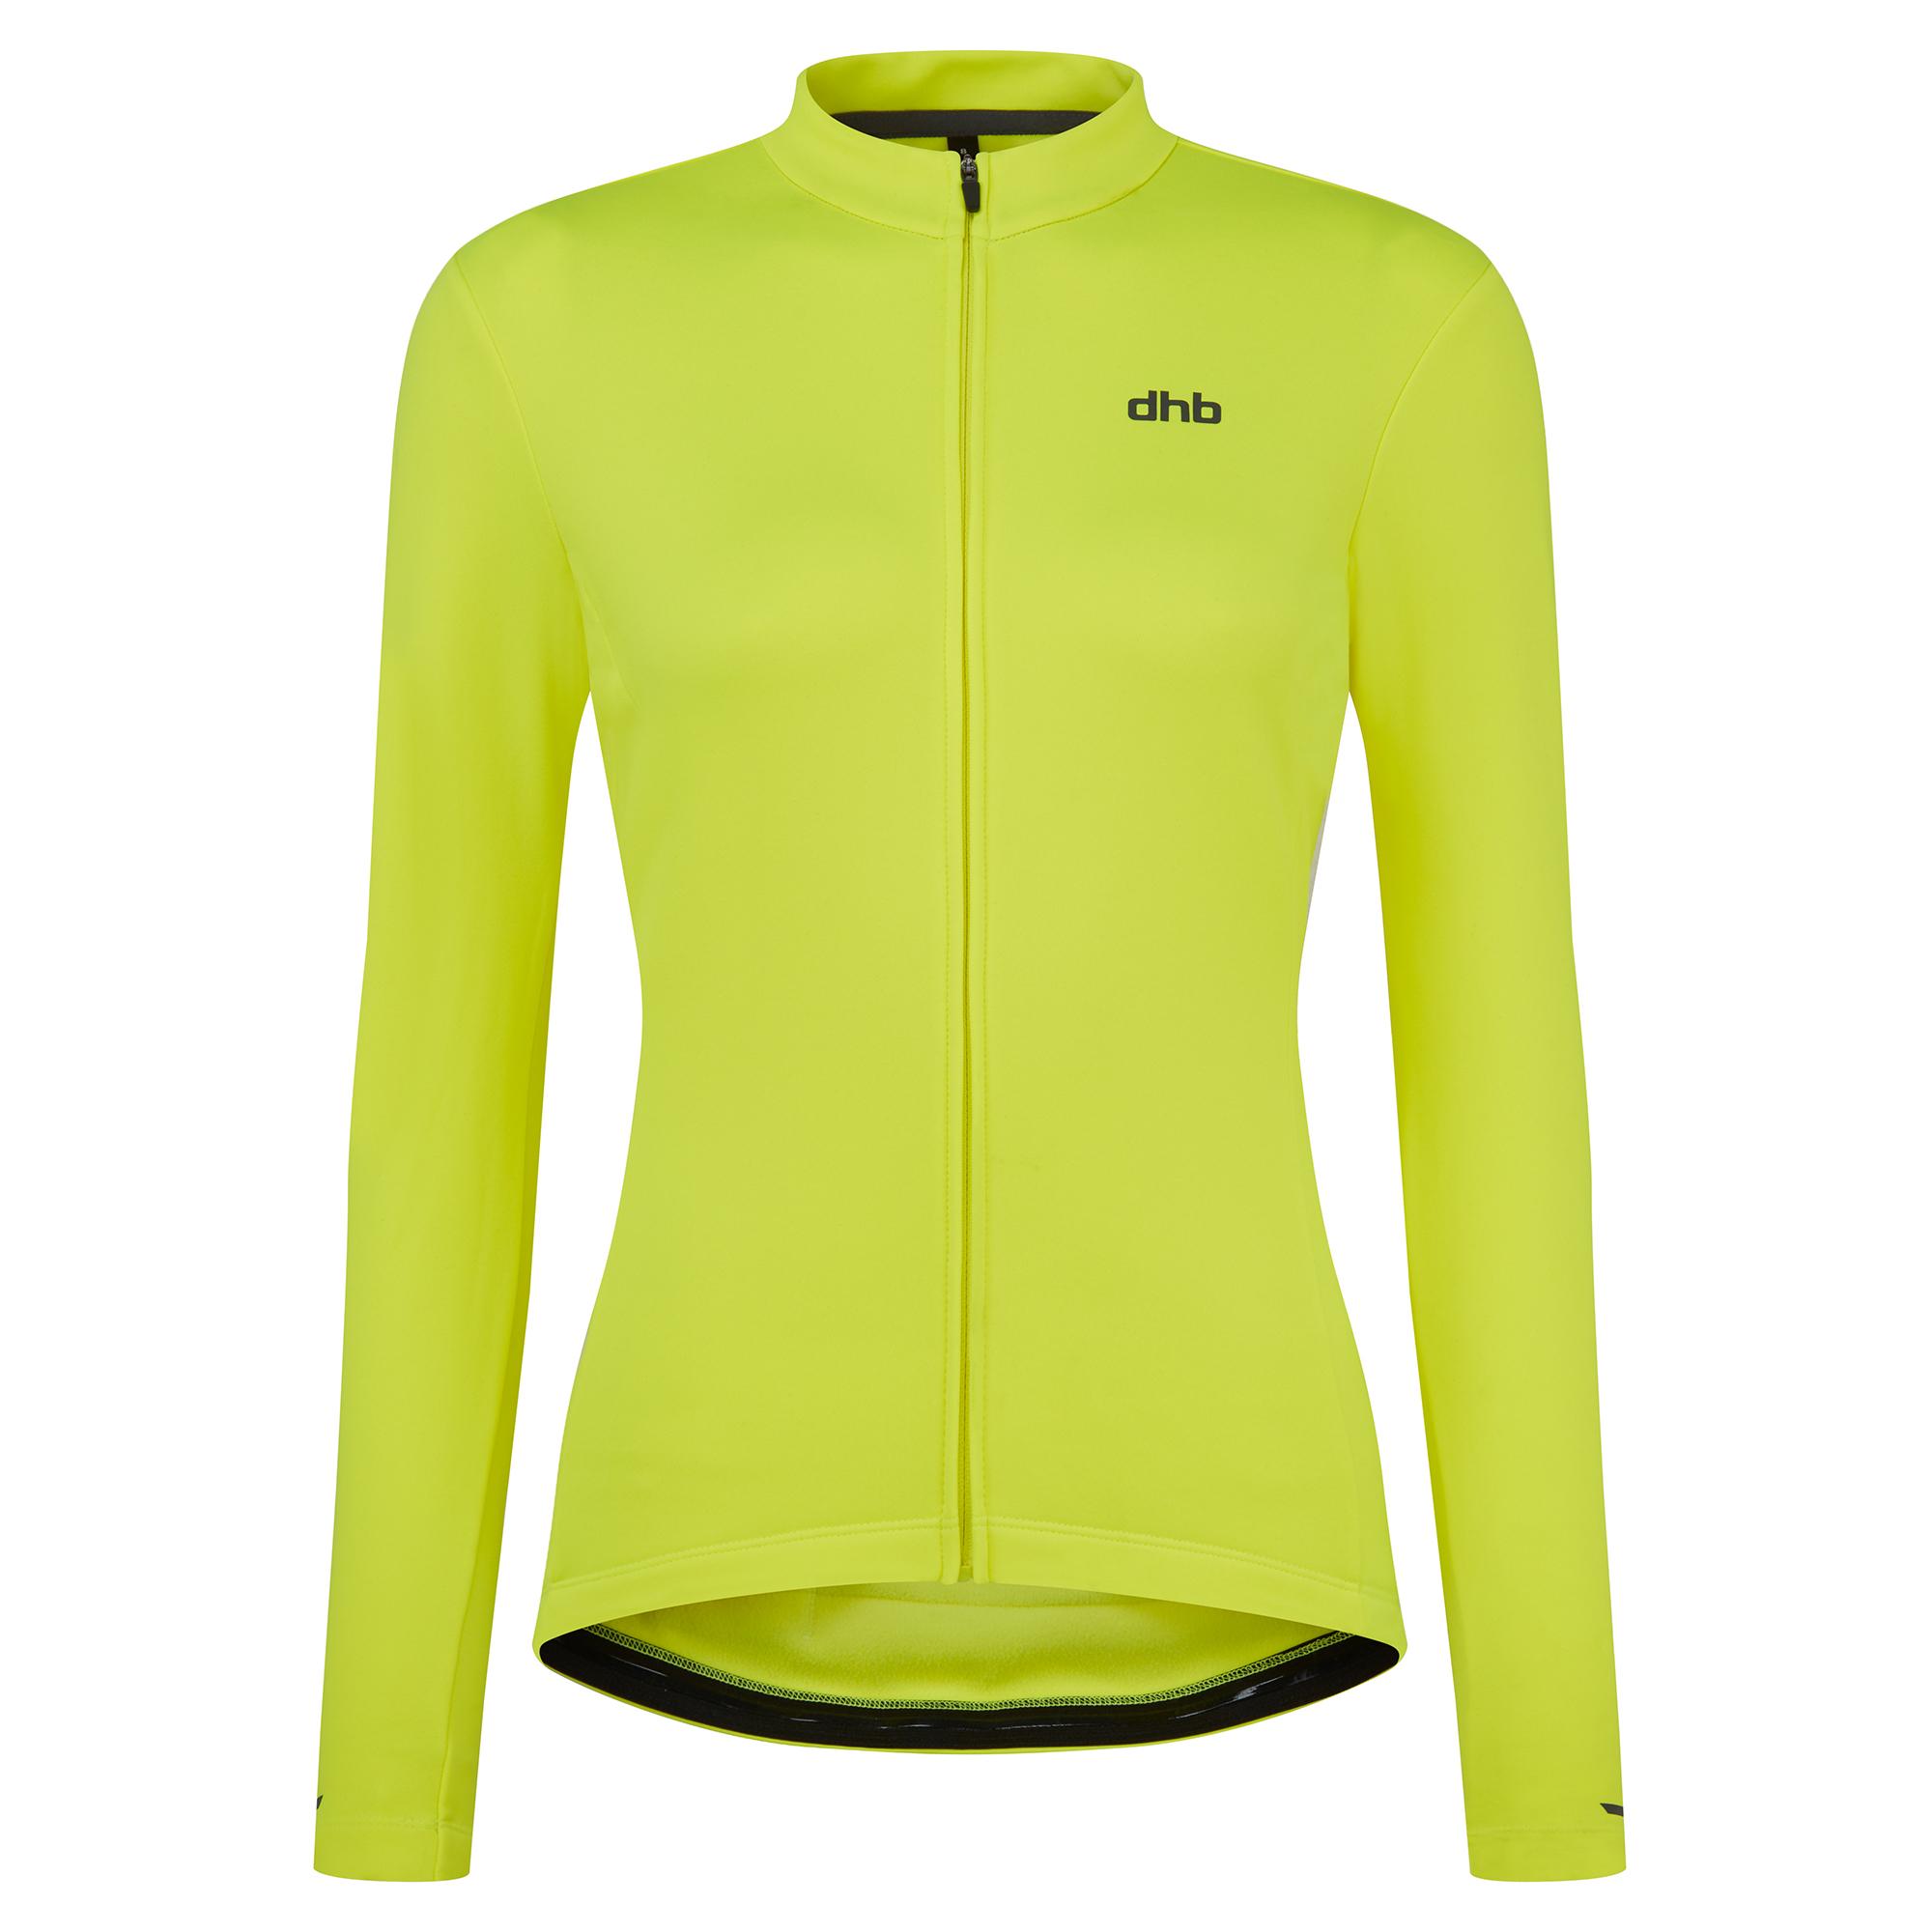 Dhb Womens Long Sleeve Thermal Cycling Jersey - Yellow Fluorescent